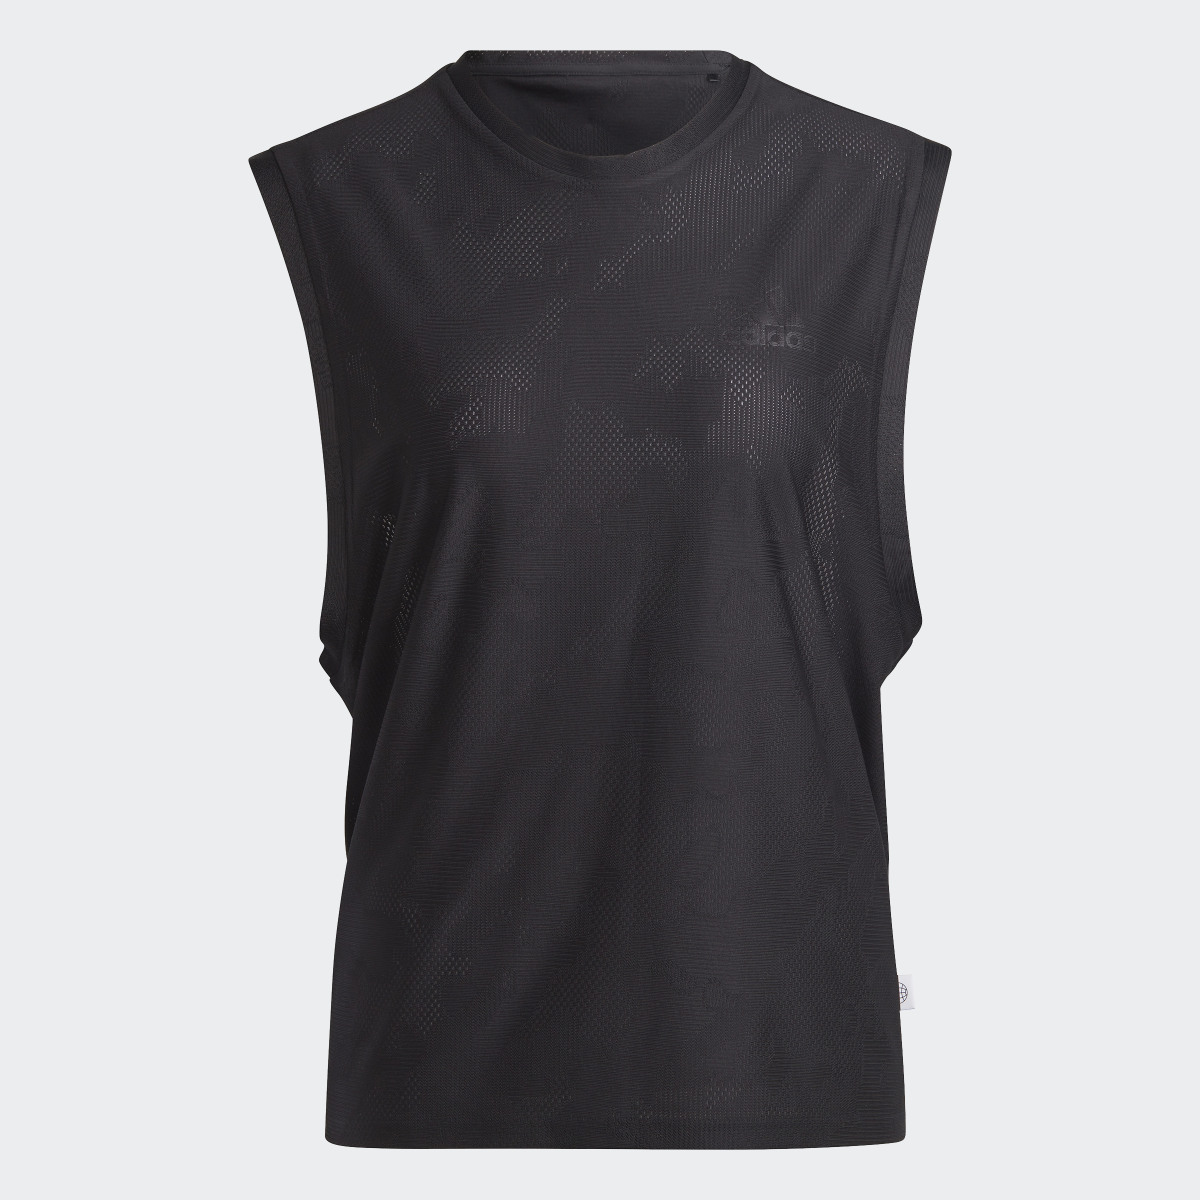 Adidas Made to Be Remade Running Tank Top. 6